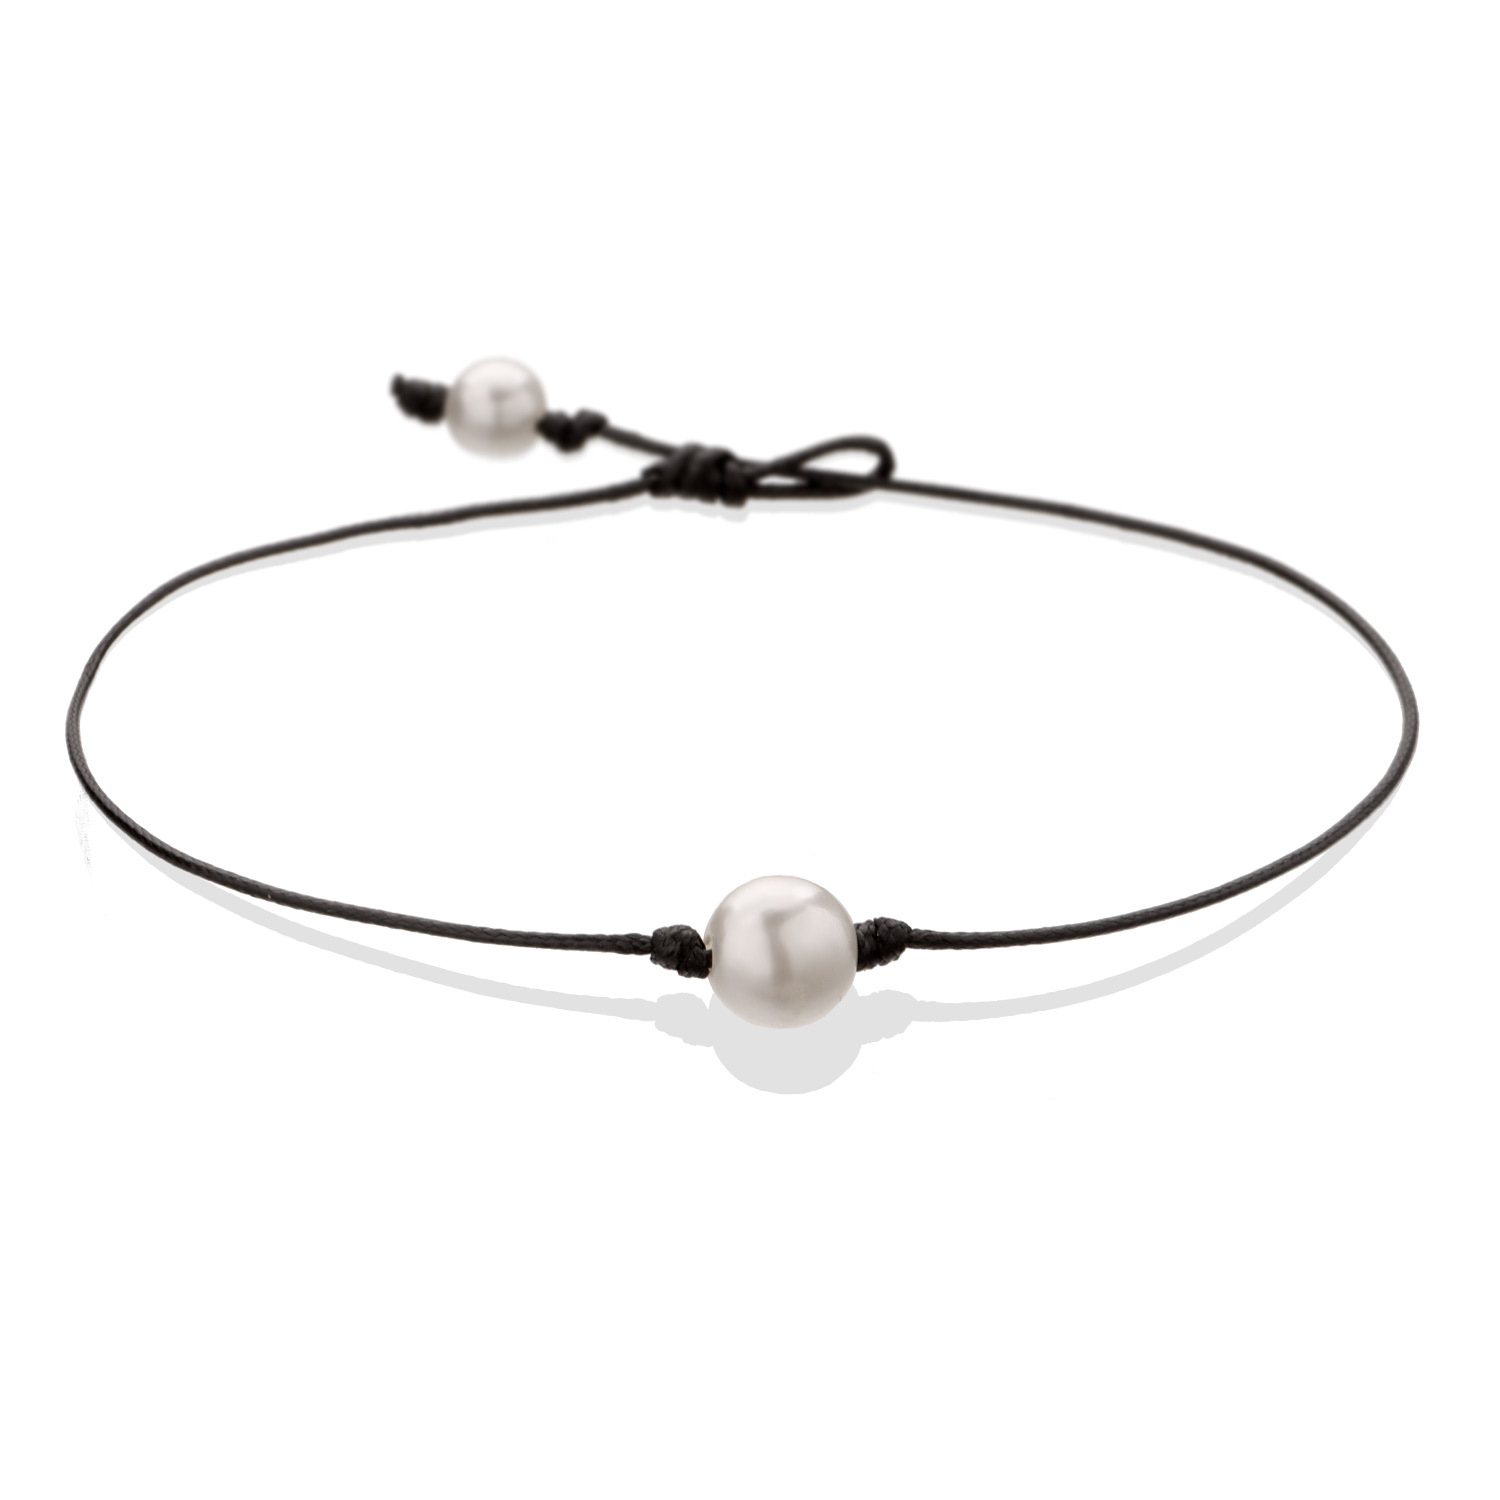 

Pearl Single Cultured Freshwater Pearls Necklace Choker for Women Genuine Leather Jewelry Handmade, Black, 14 inches